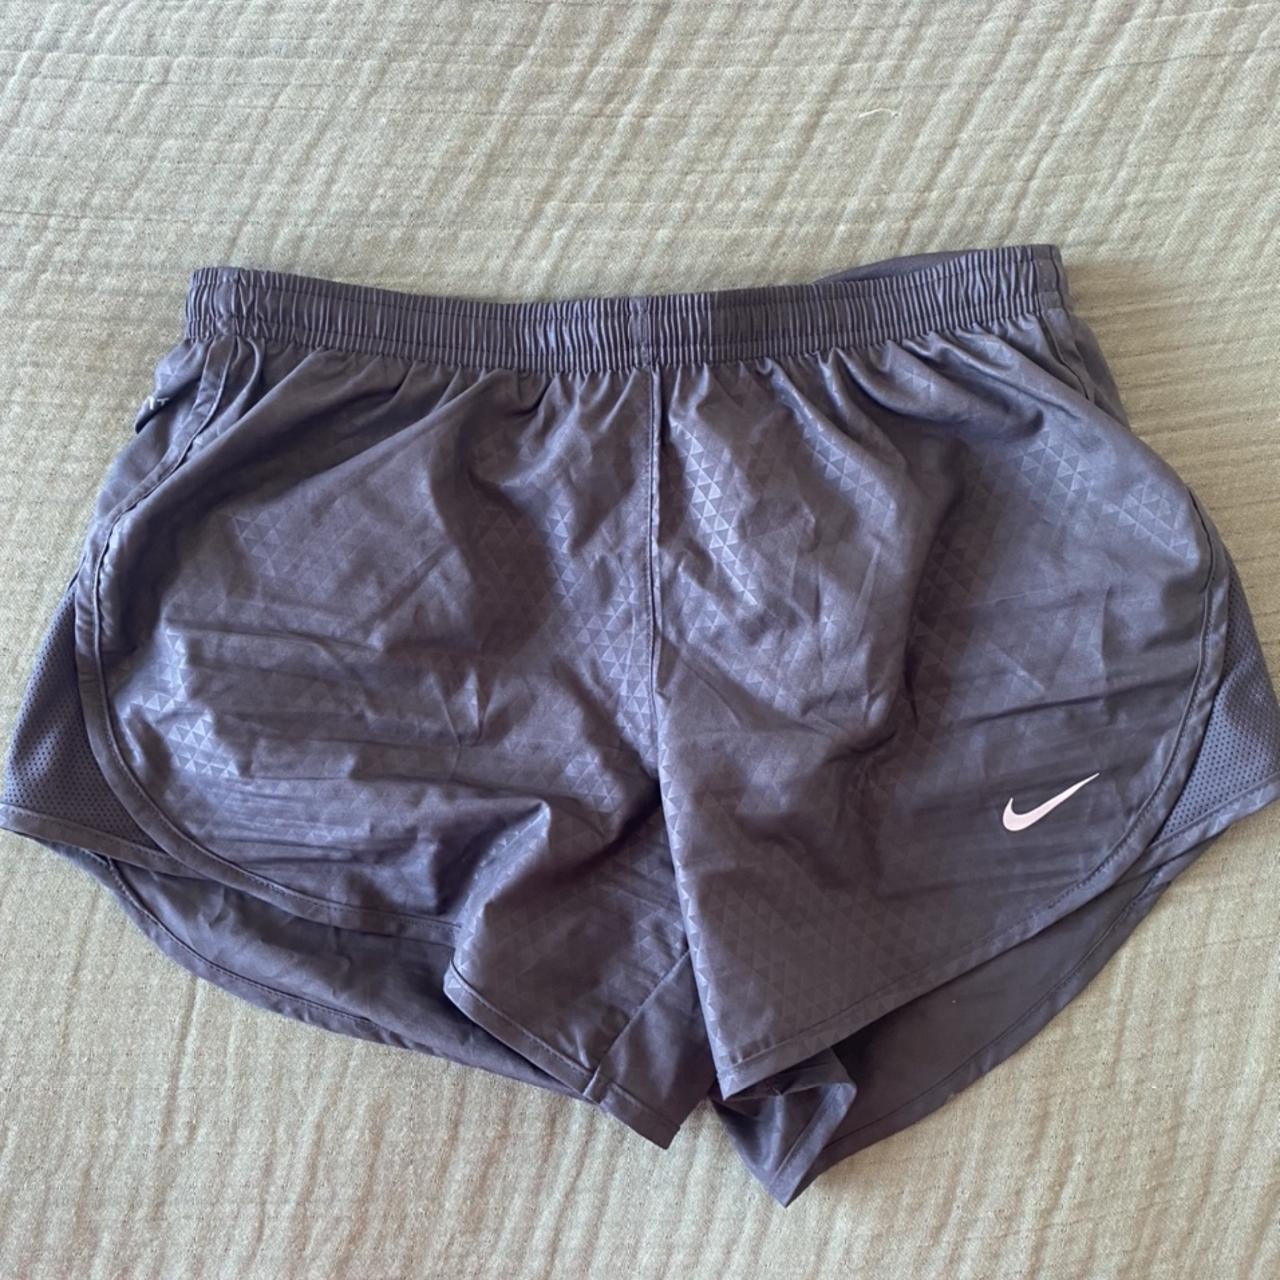 Nike dry fit shorts Great condition 👍🏼 - Depop